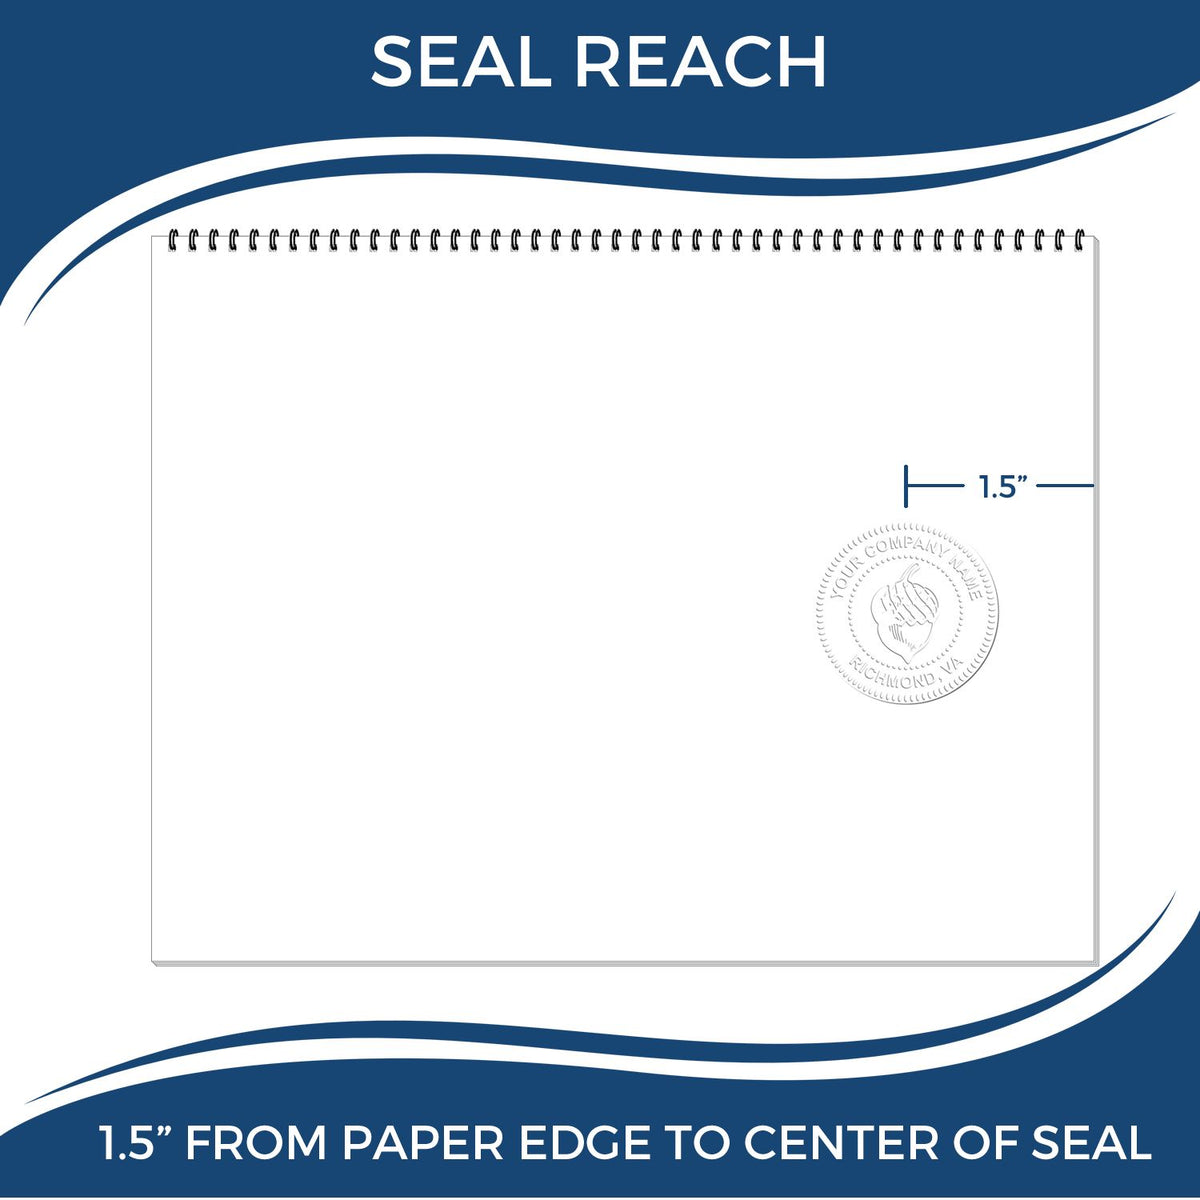 An infographic showing the seal reach which is represented by a ruler and a miniature seal image of the Gift Mississippi Landscape Architect Seal